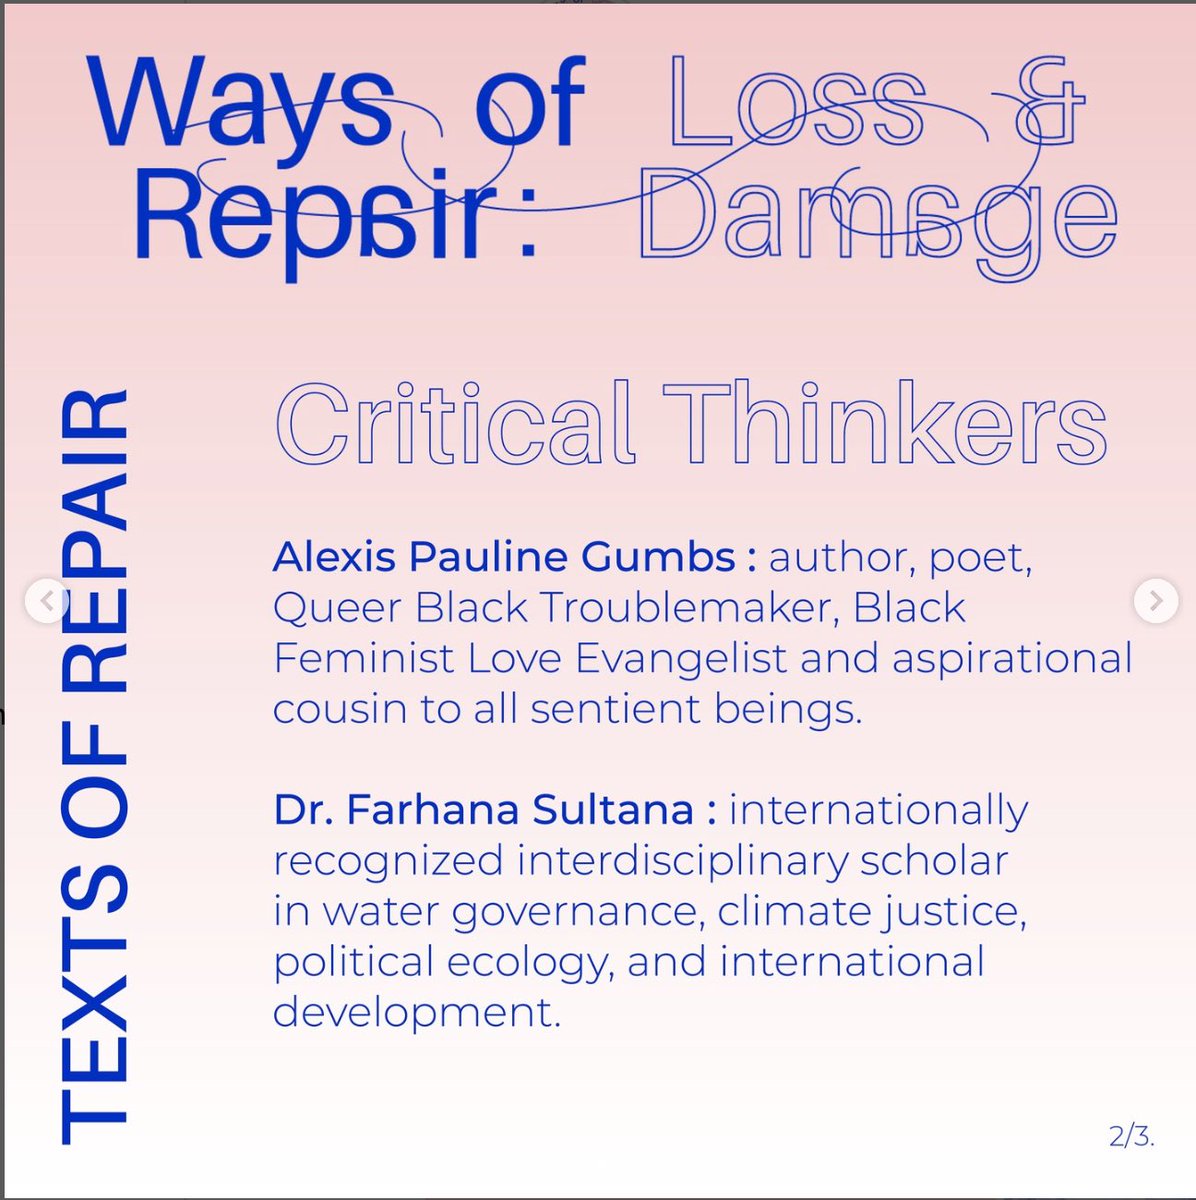 I knew during my writing process that Audre’s most urgent wish for me to LIVE this truth. I’m honored to announce that @LossandDamage has commissioned me as one of 3 critical thinkers to write new “texts of repair” as one part of a multi-layered strategy.